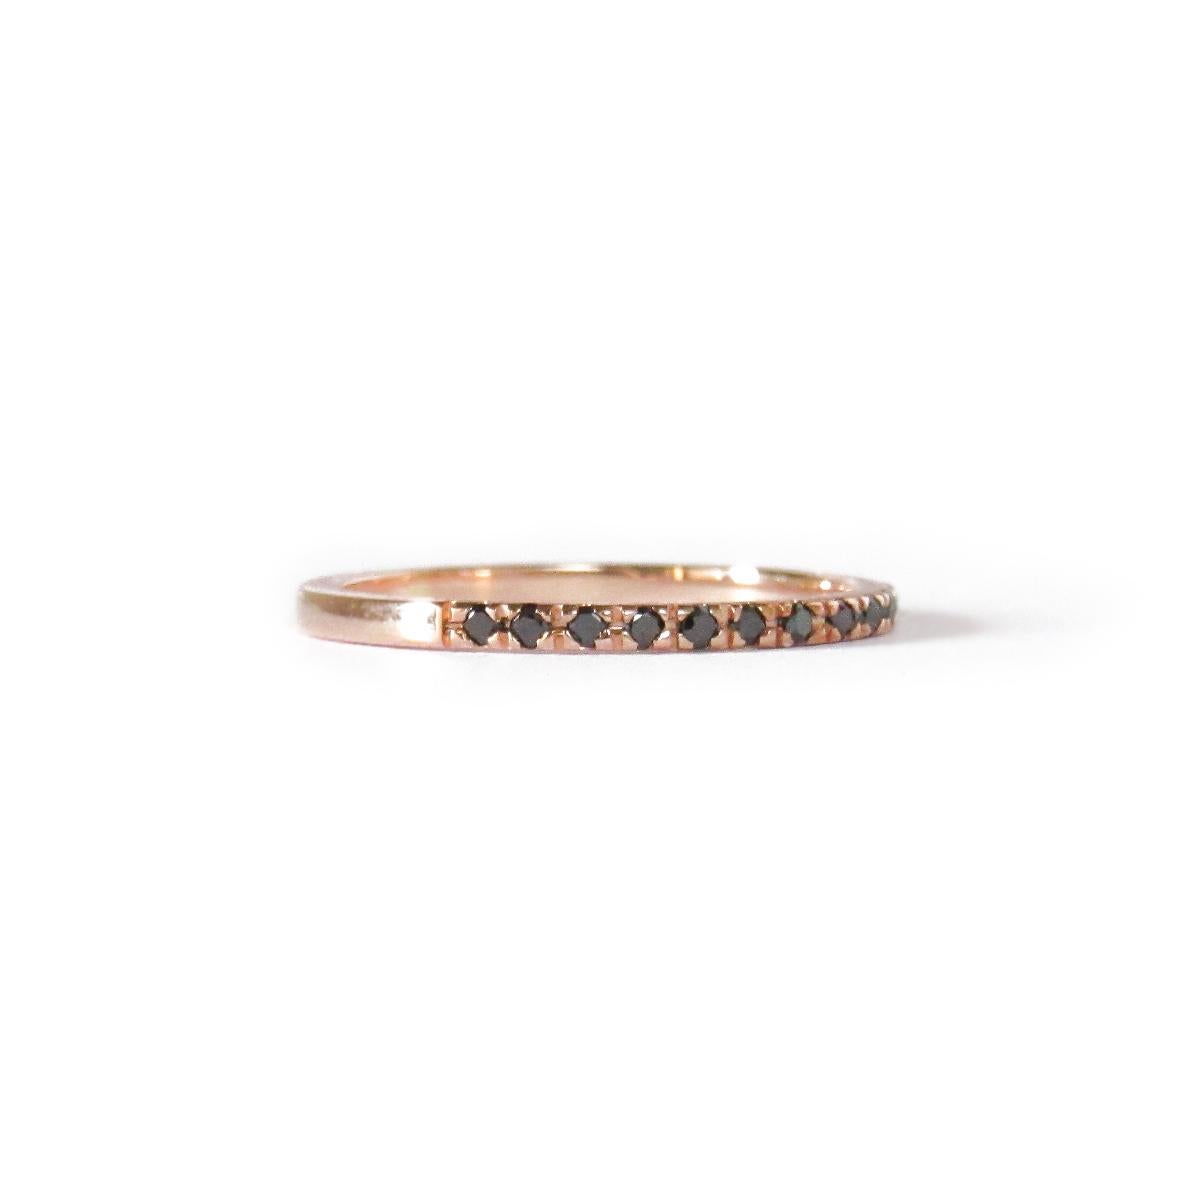 MADE TO ORDER *Please note that we take 30 business days to create your jewel before its ready to ship. 

A 14K rose gold unique anniversary band that contains black diamonds. 

Gemstones: Genuine Black Diamonds (0.15 total carat weight)
* these